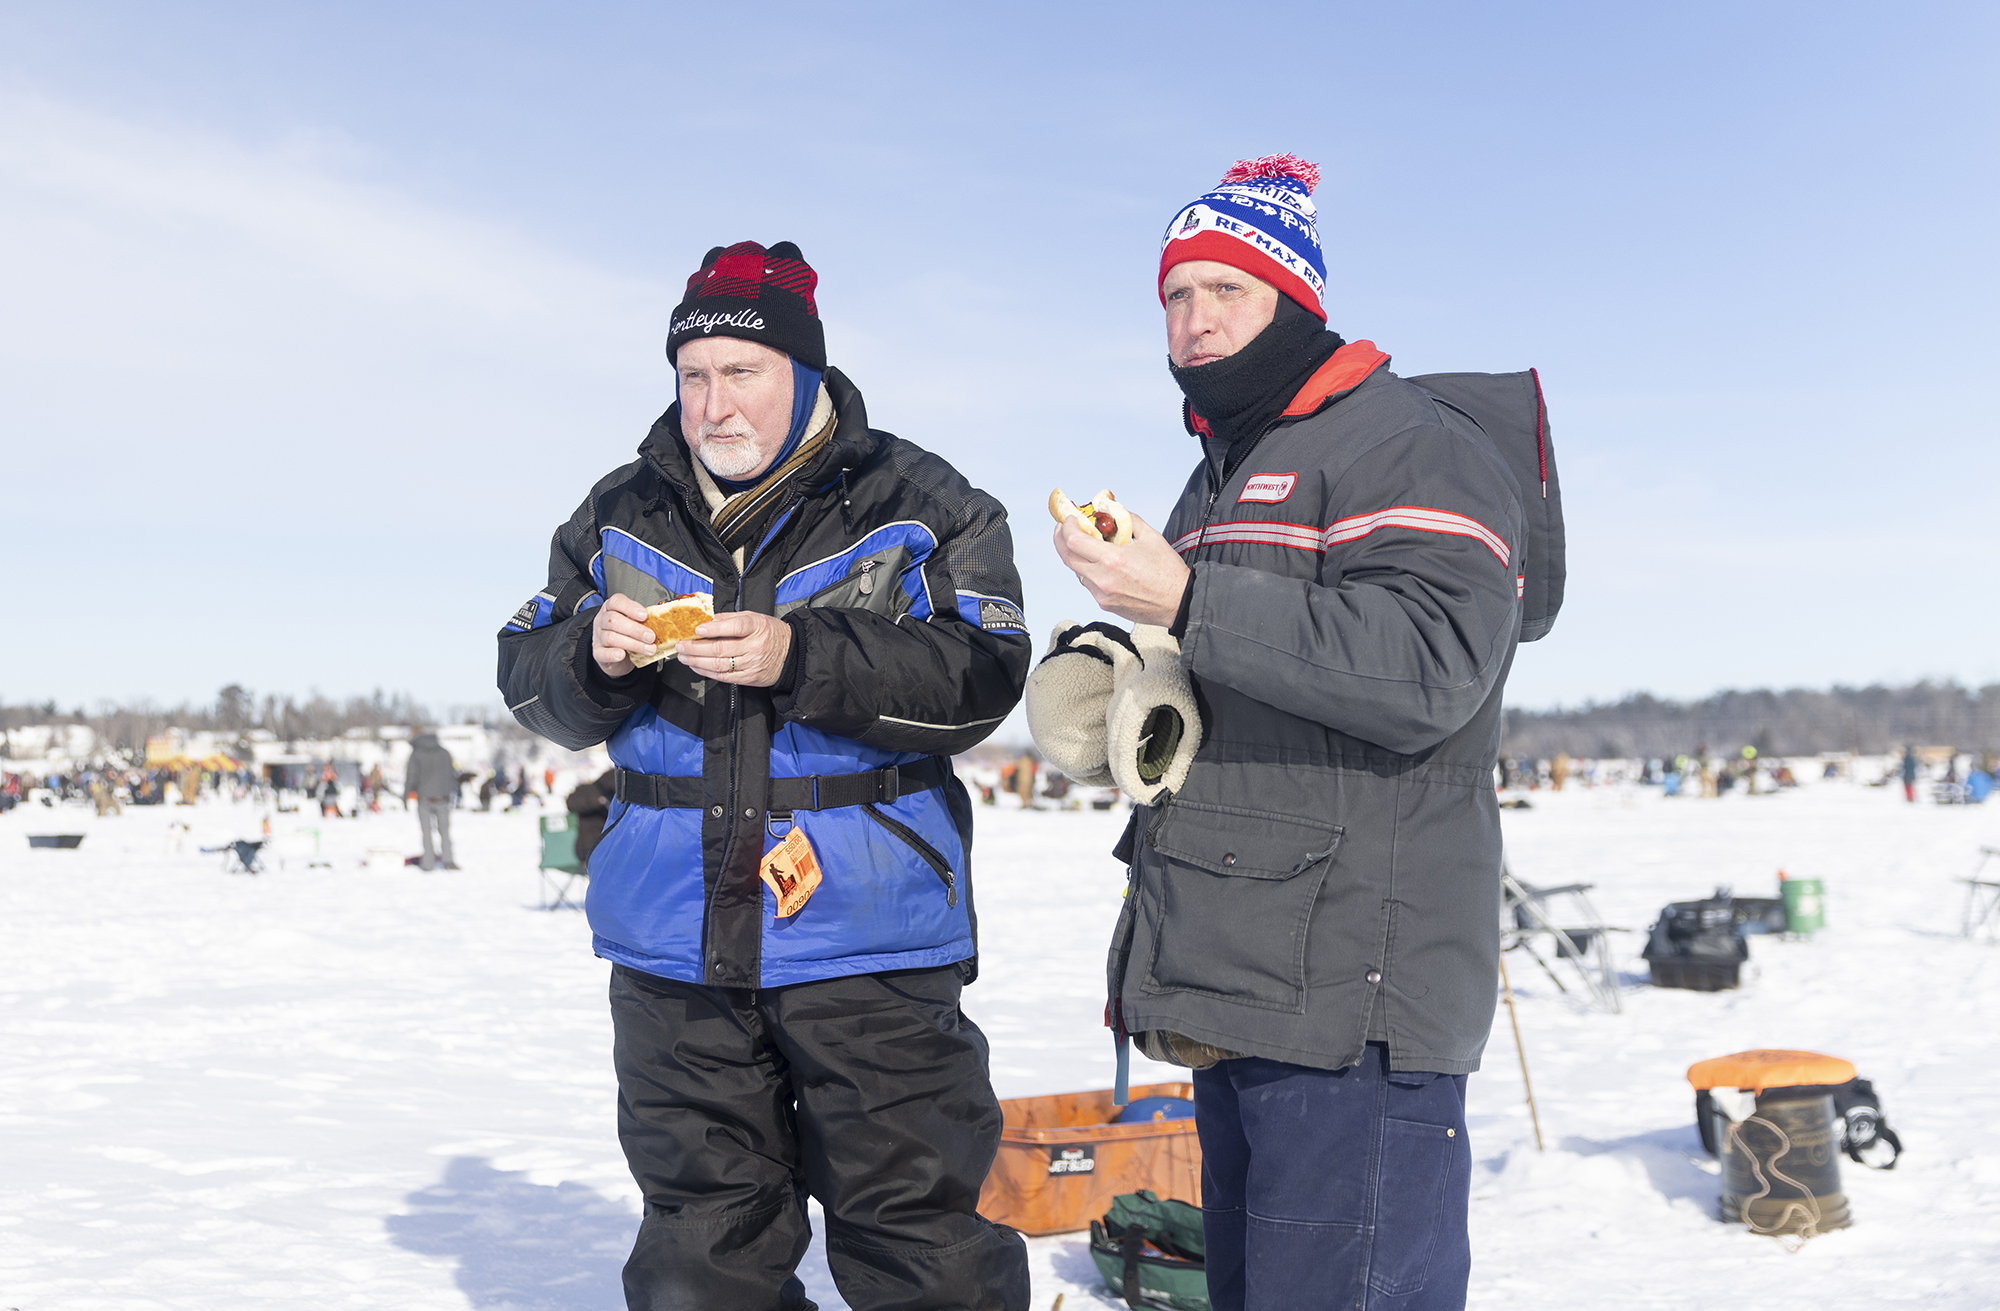 Two men dressed in coats and hats eat hot dogs on the ice.